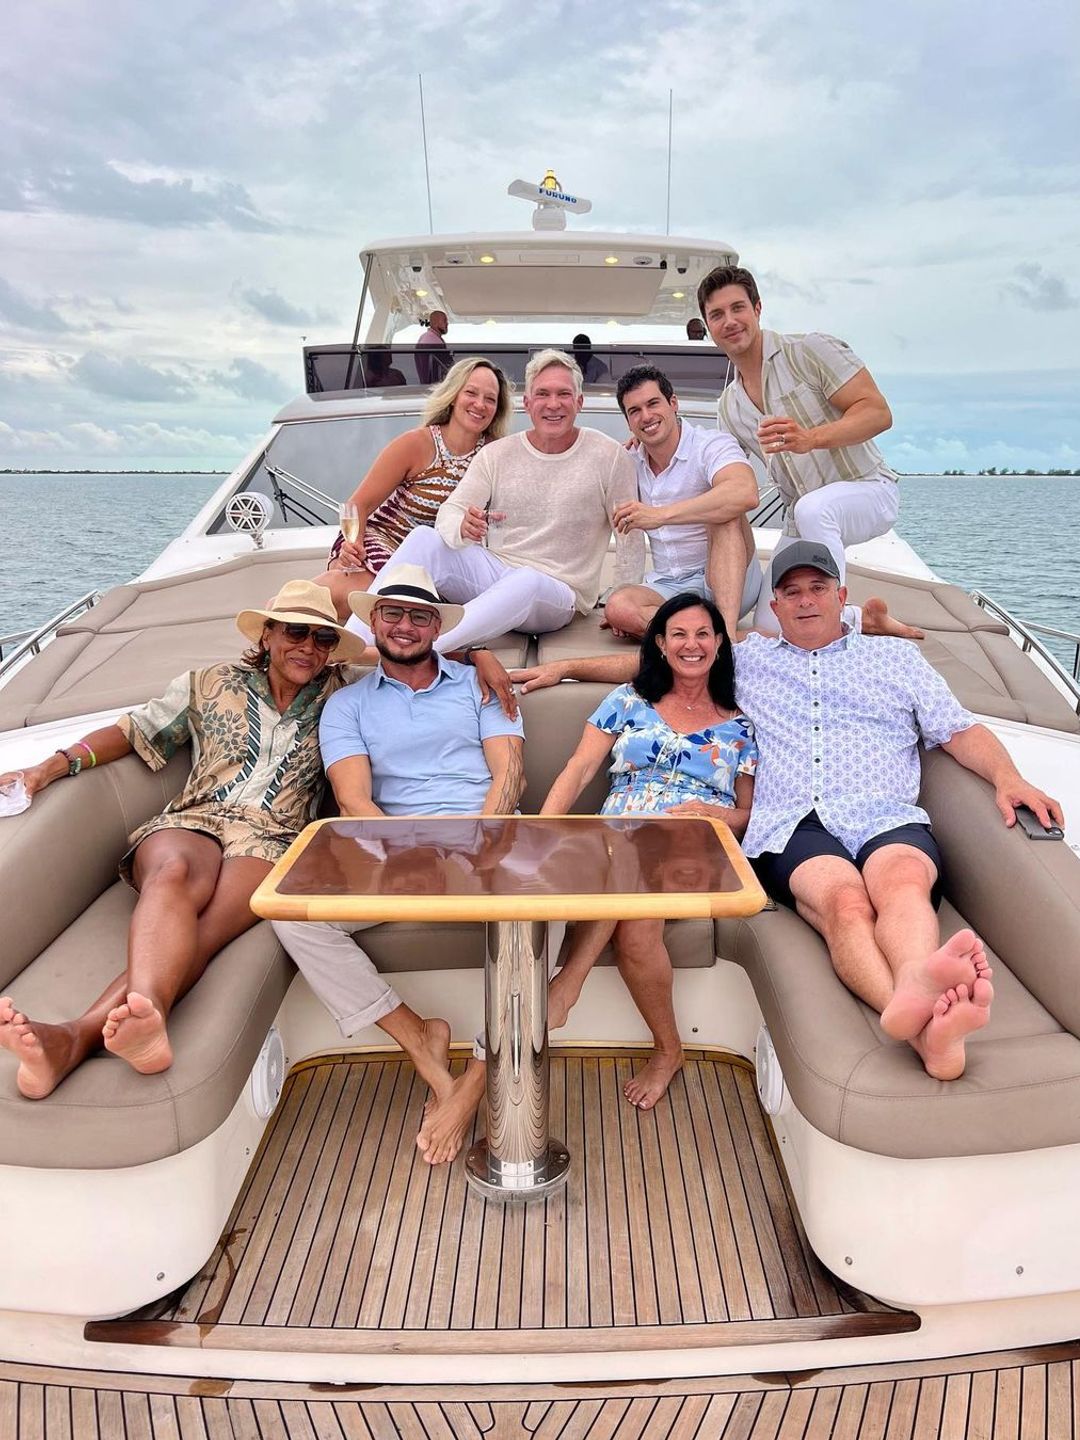 The 'Travel Squad' all sat posing together on the back of a yacht